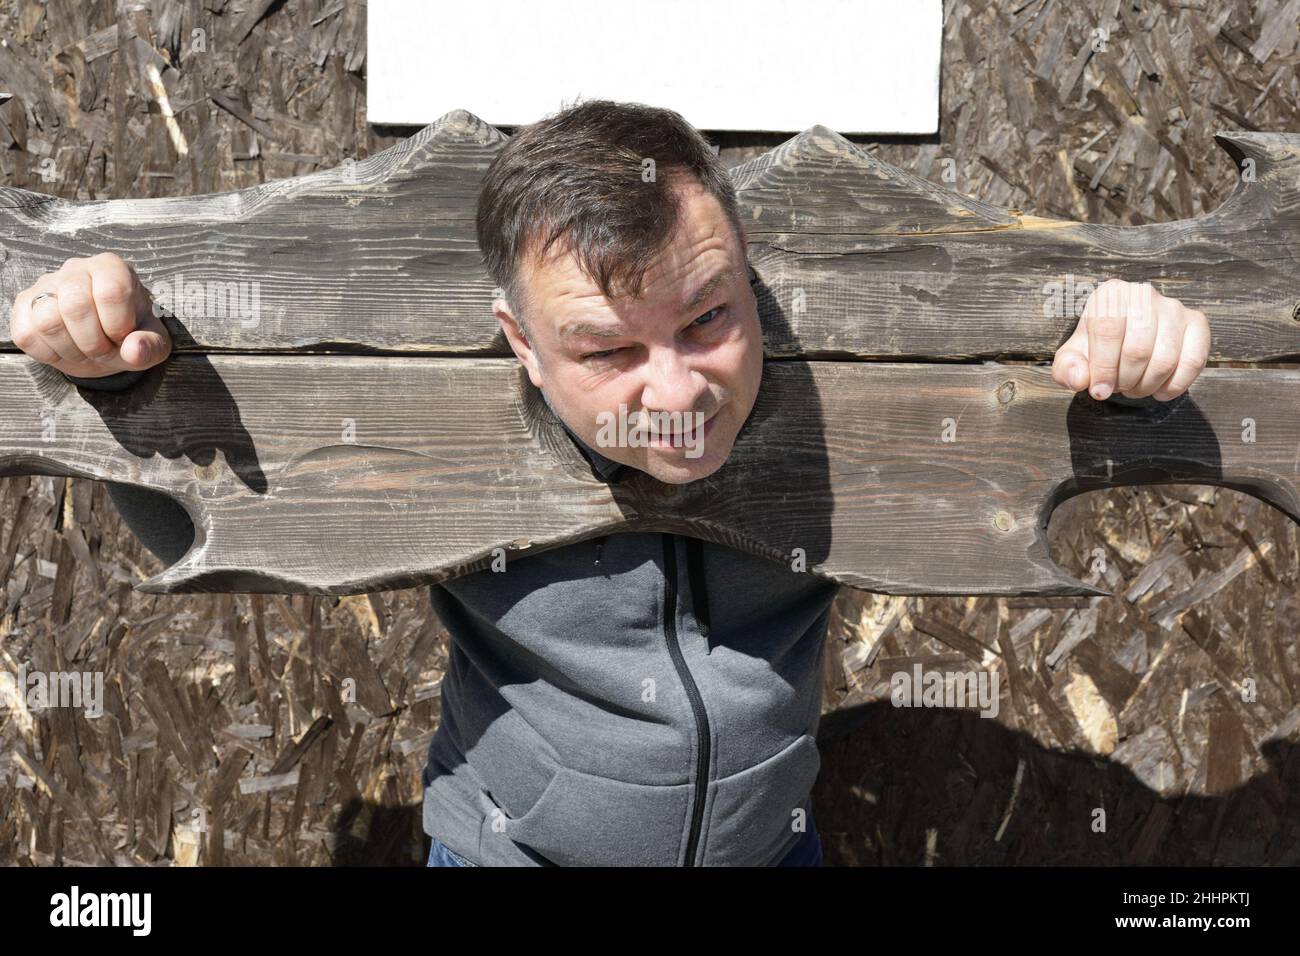 Portrait of man in wooden pillory outdoor Stock Photo